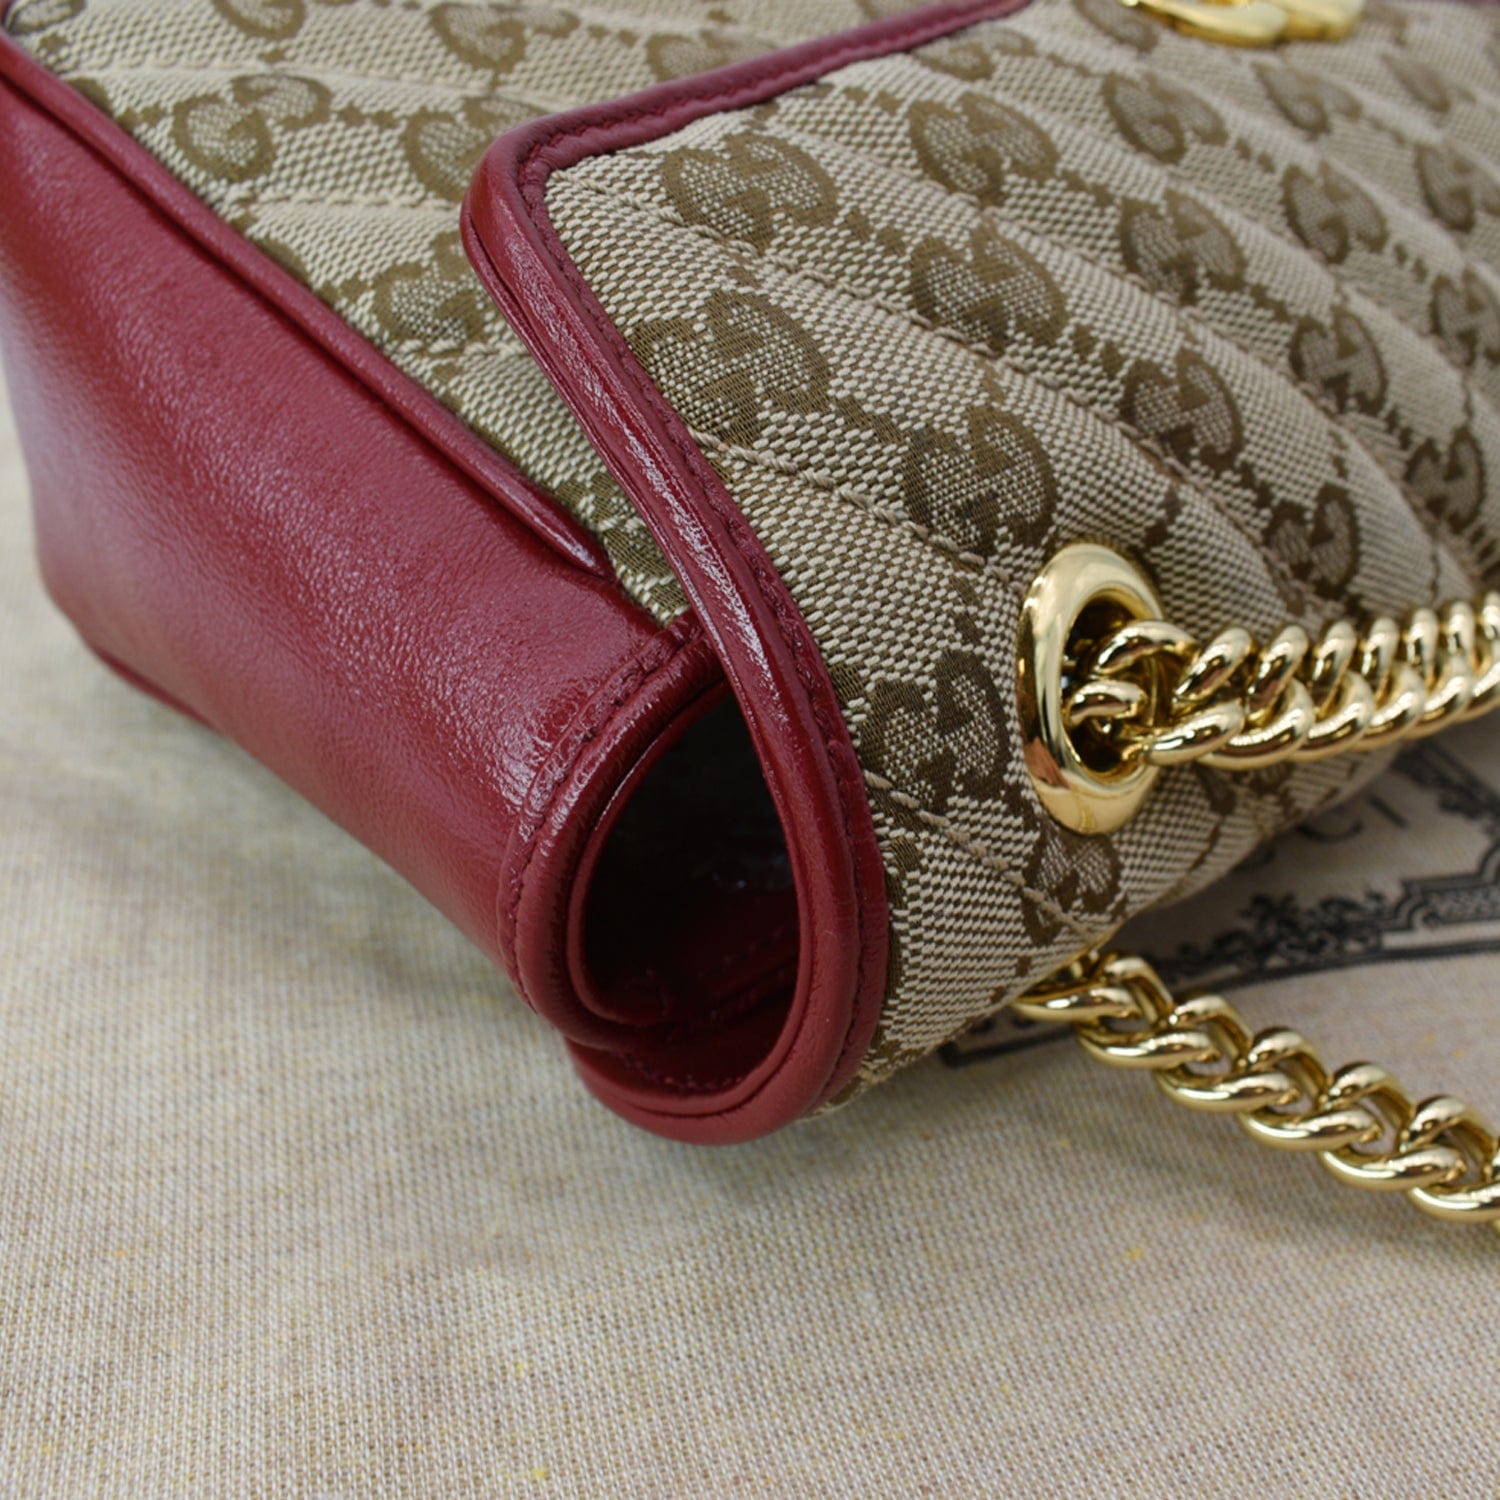 Gucci GG Marmont Small Matelasse Canvas Shoulder Bag Red 443497